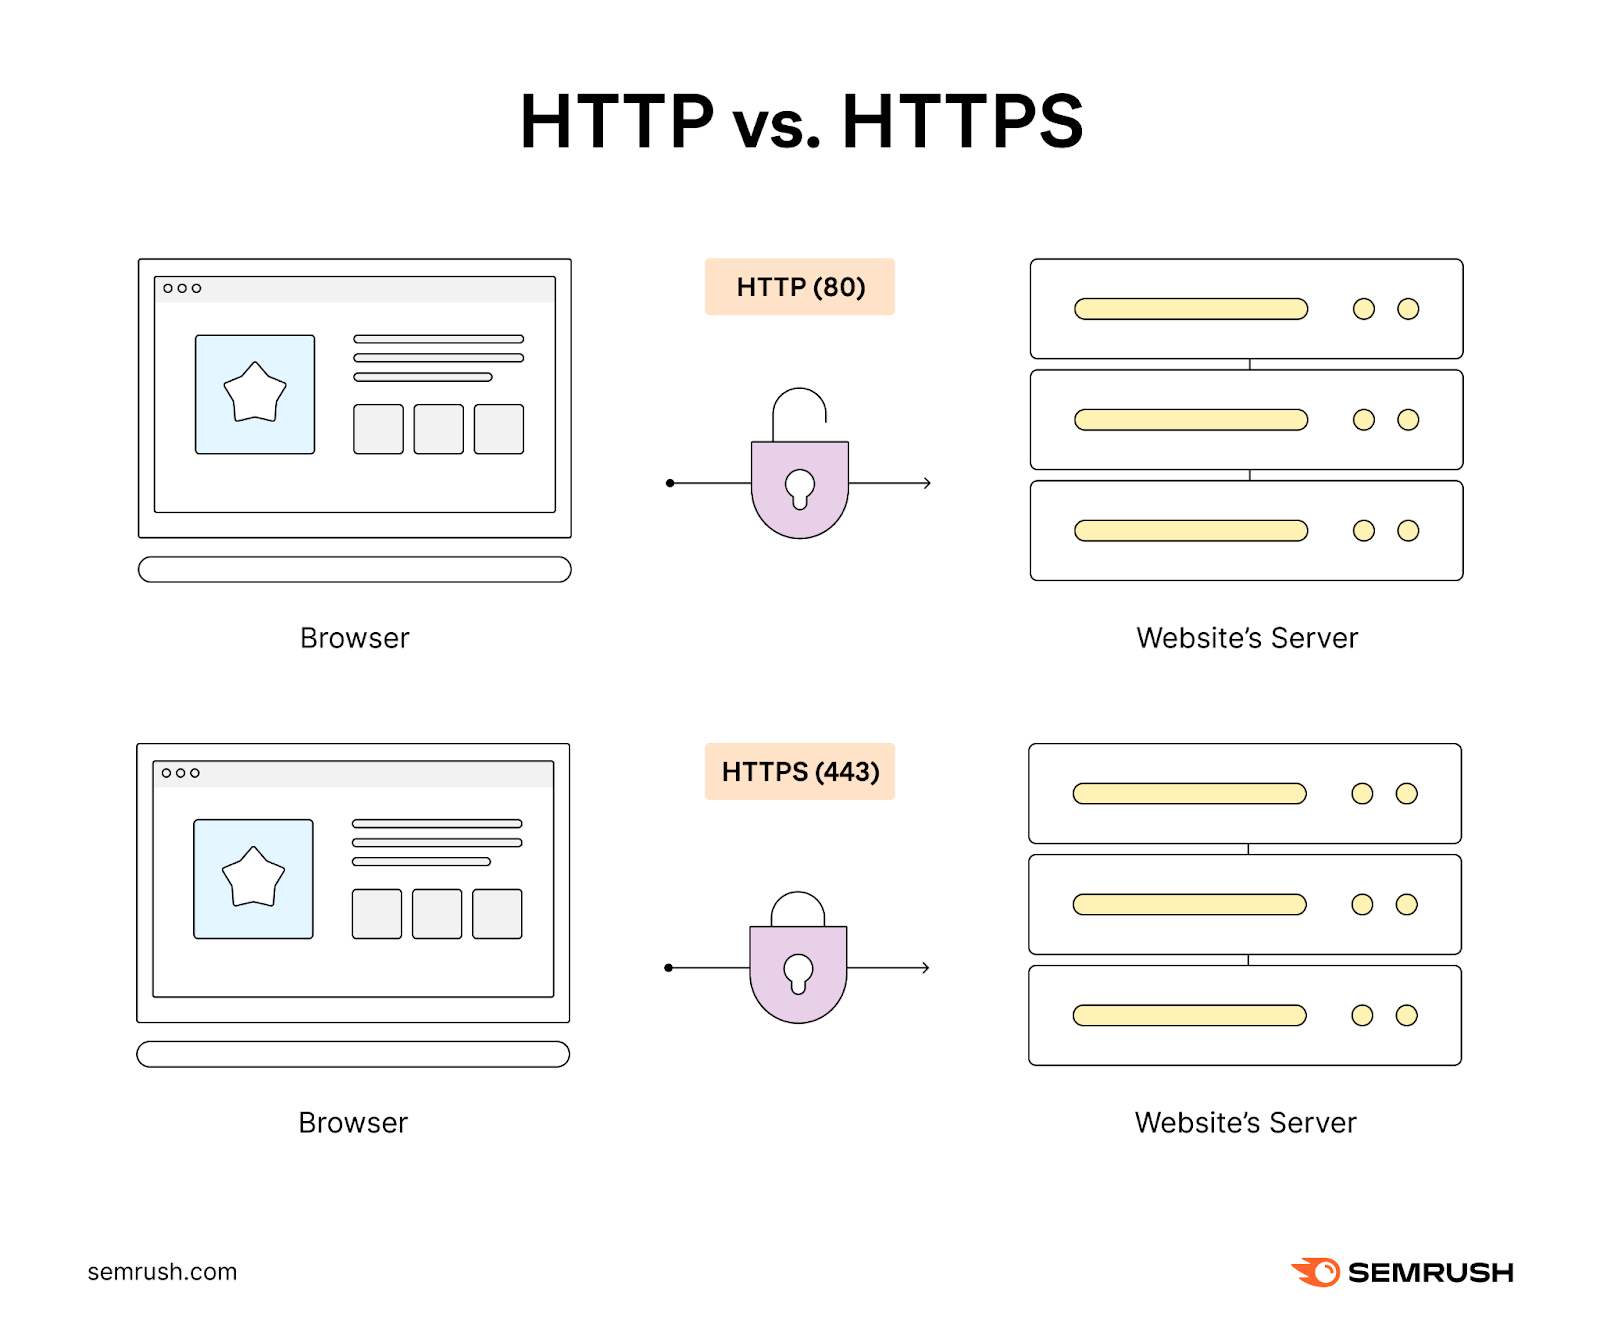 HTTP typically uses port 80, while HTTPS uses port 443